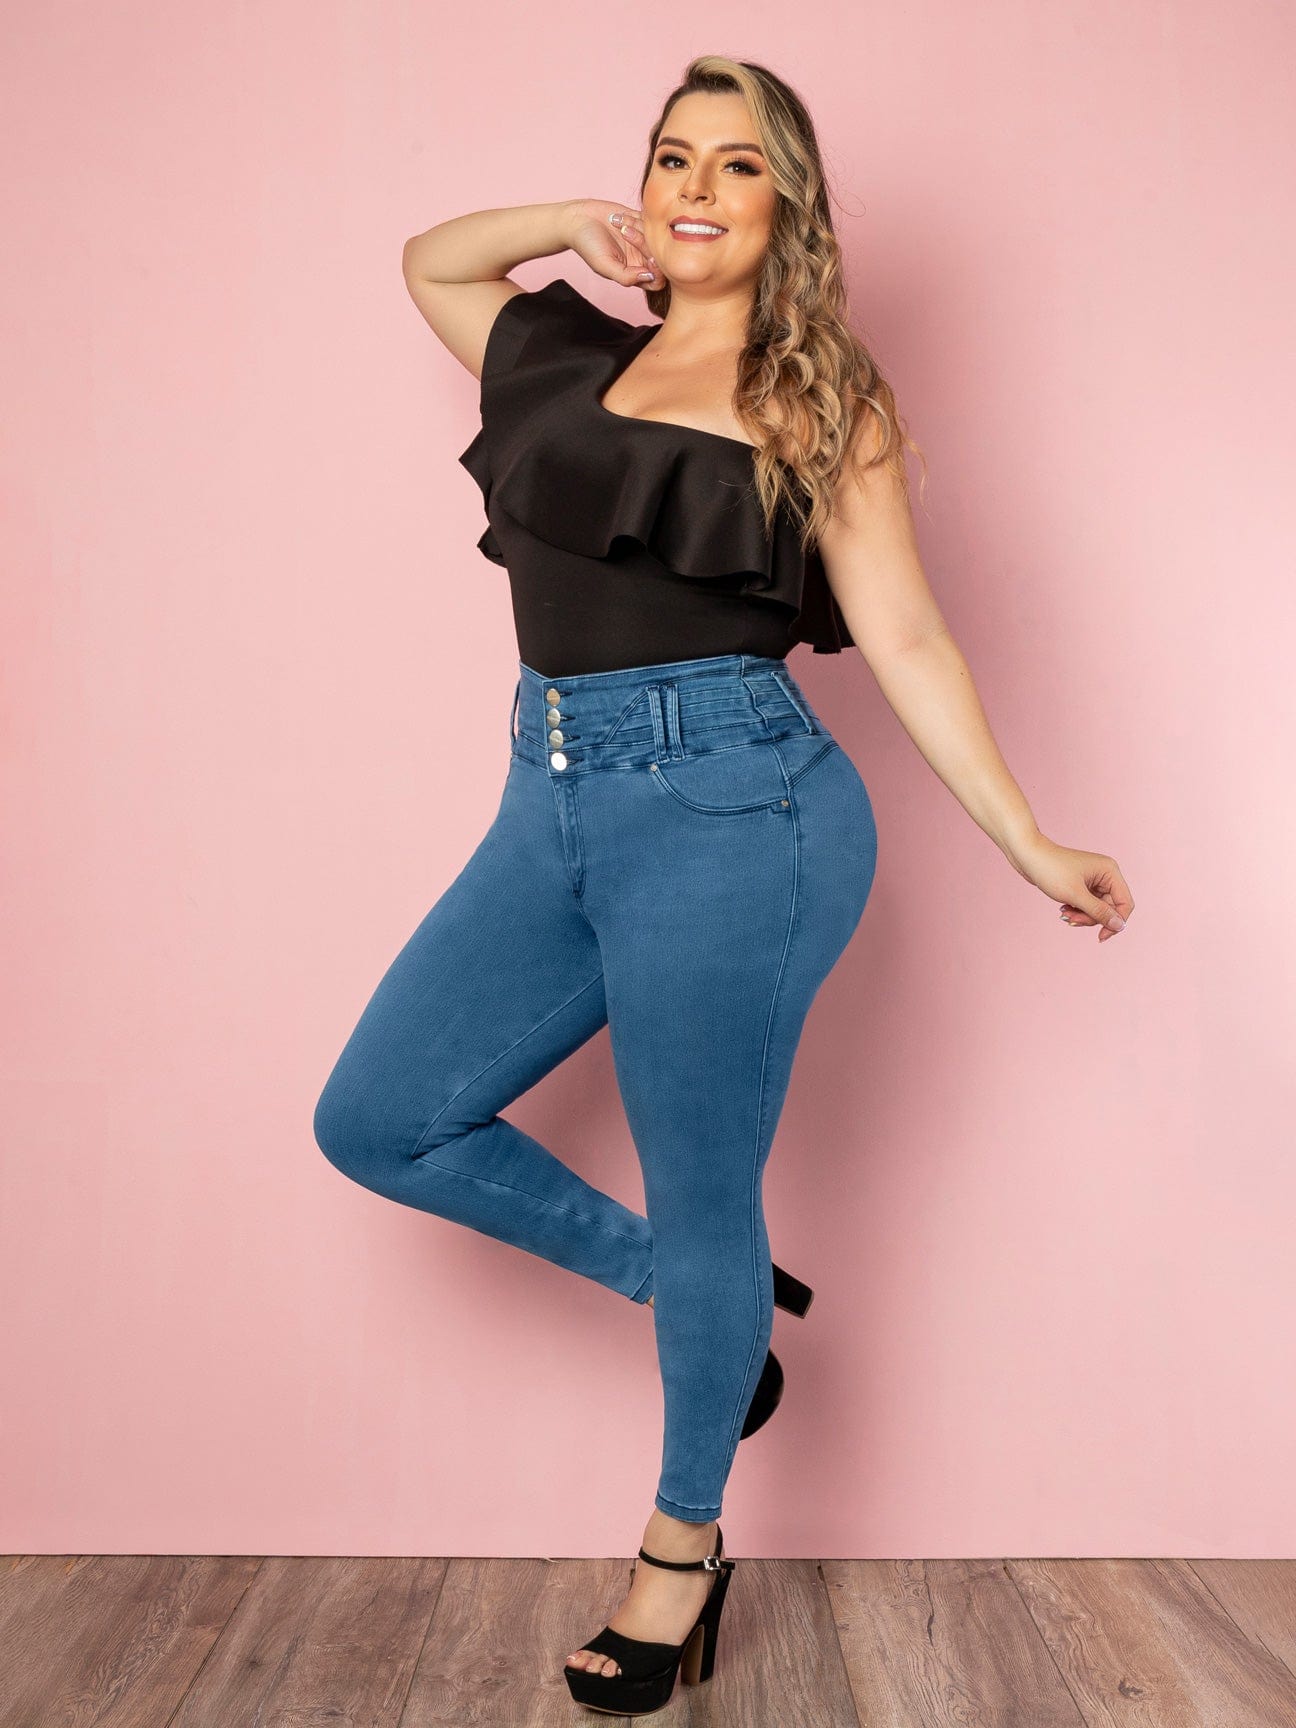 Can Cun Butt Lift Skin Tight Jeans with plus sized model front view.